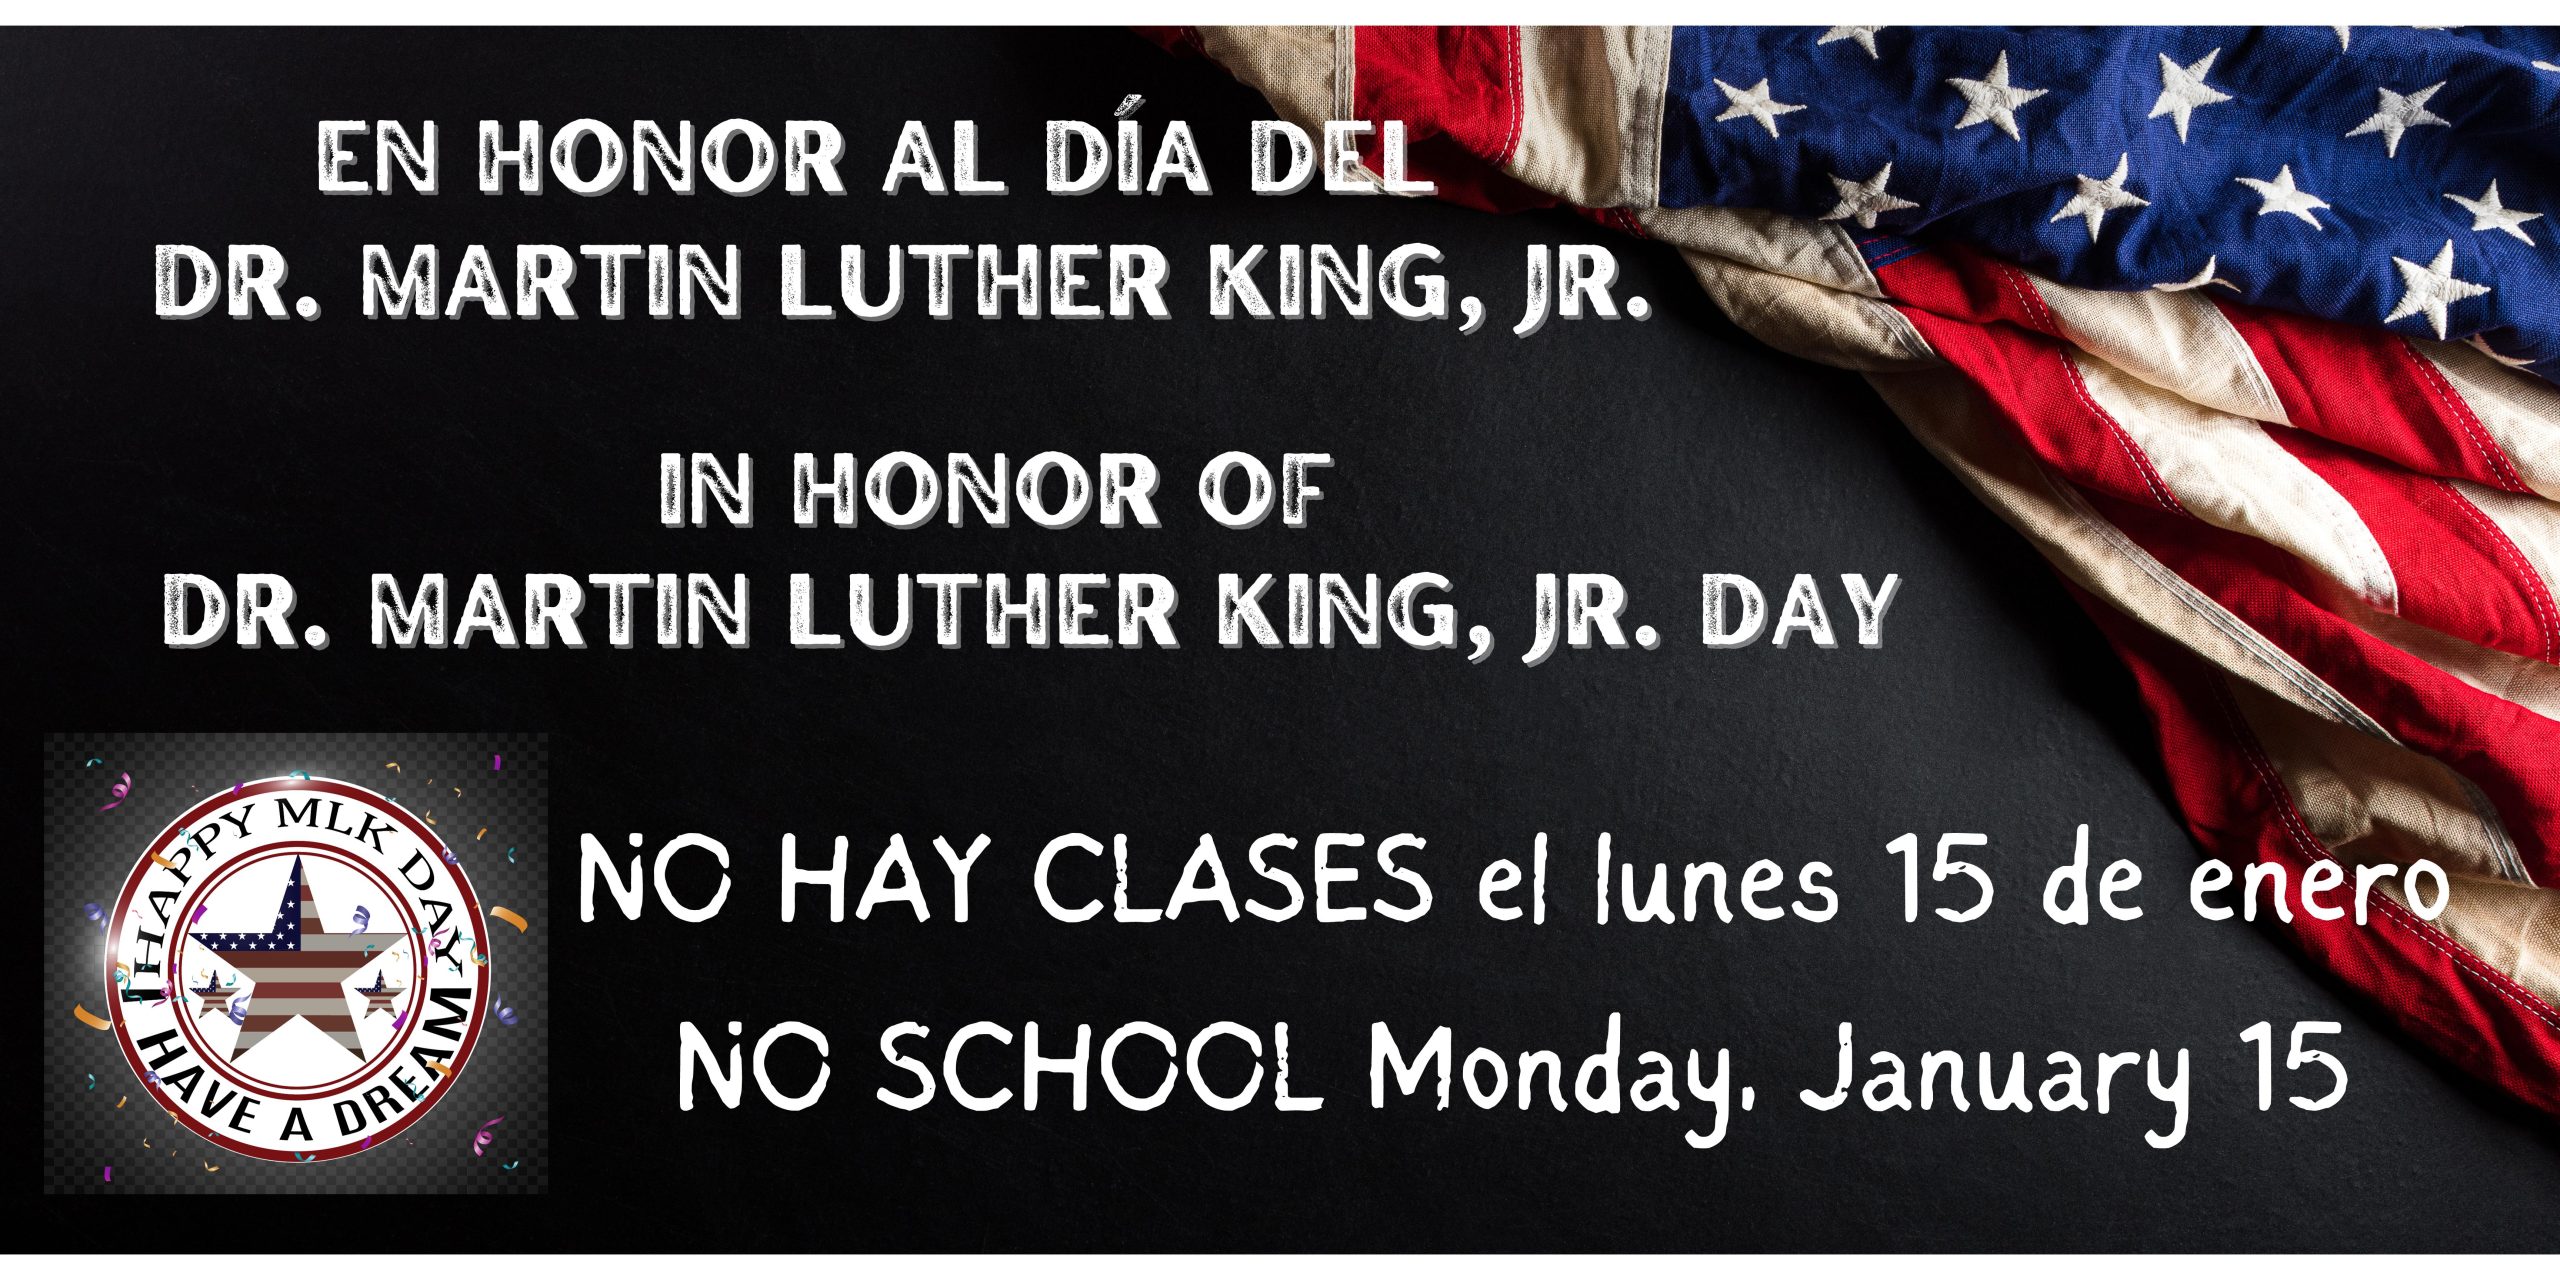 Black background with American flag in the top right corner. White text says, "In honor of/En honor al Día del Dr. Martin Luther King, Jr. Day" and "NO SCHOOL Monday, January 15" and "NO HAY CLASES el lunes 15 del enero." A white insignia in the bottom left corner that says, "Happy MLK Day" and "I Have a Dream"